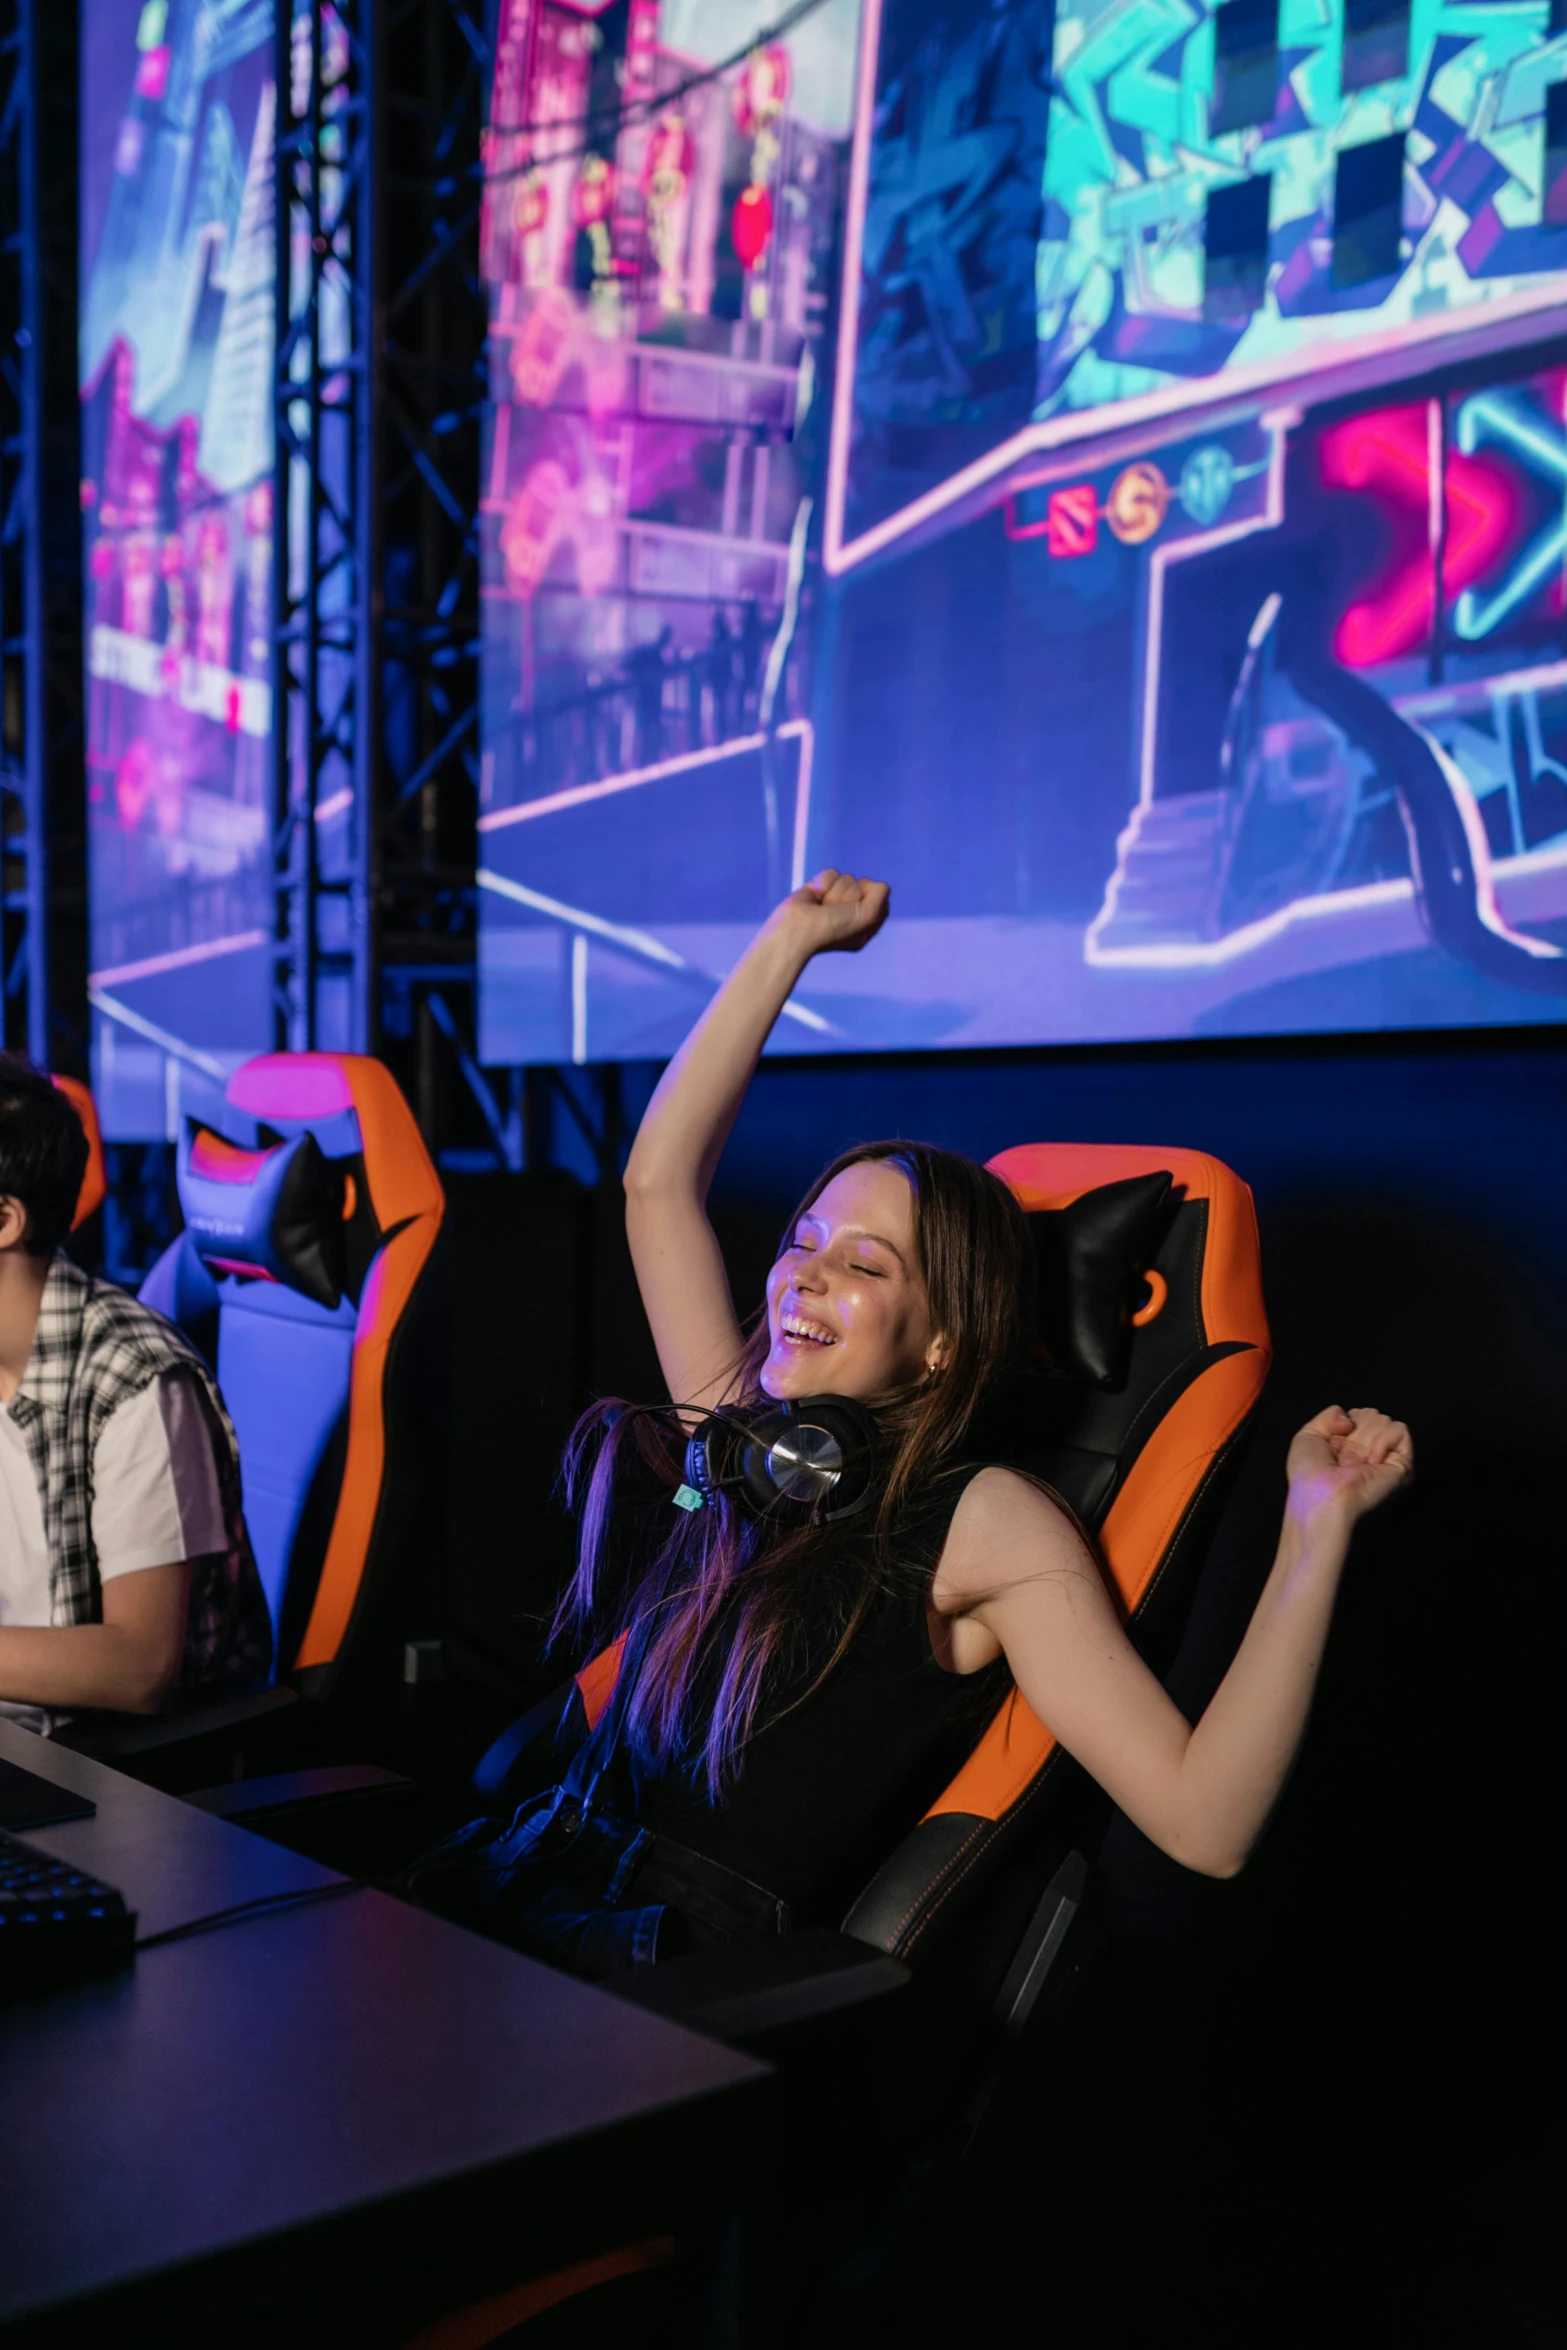 a group of people playing a video game, pink and orange neon lights, gaming chair, screaming into air, penguinz0